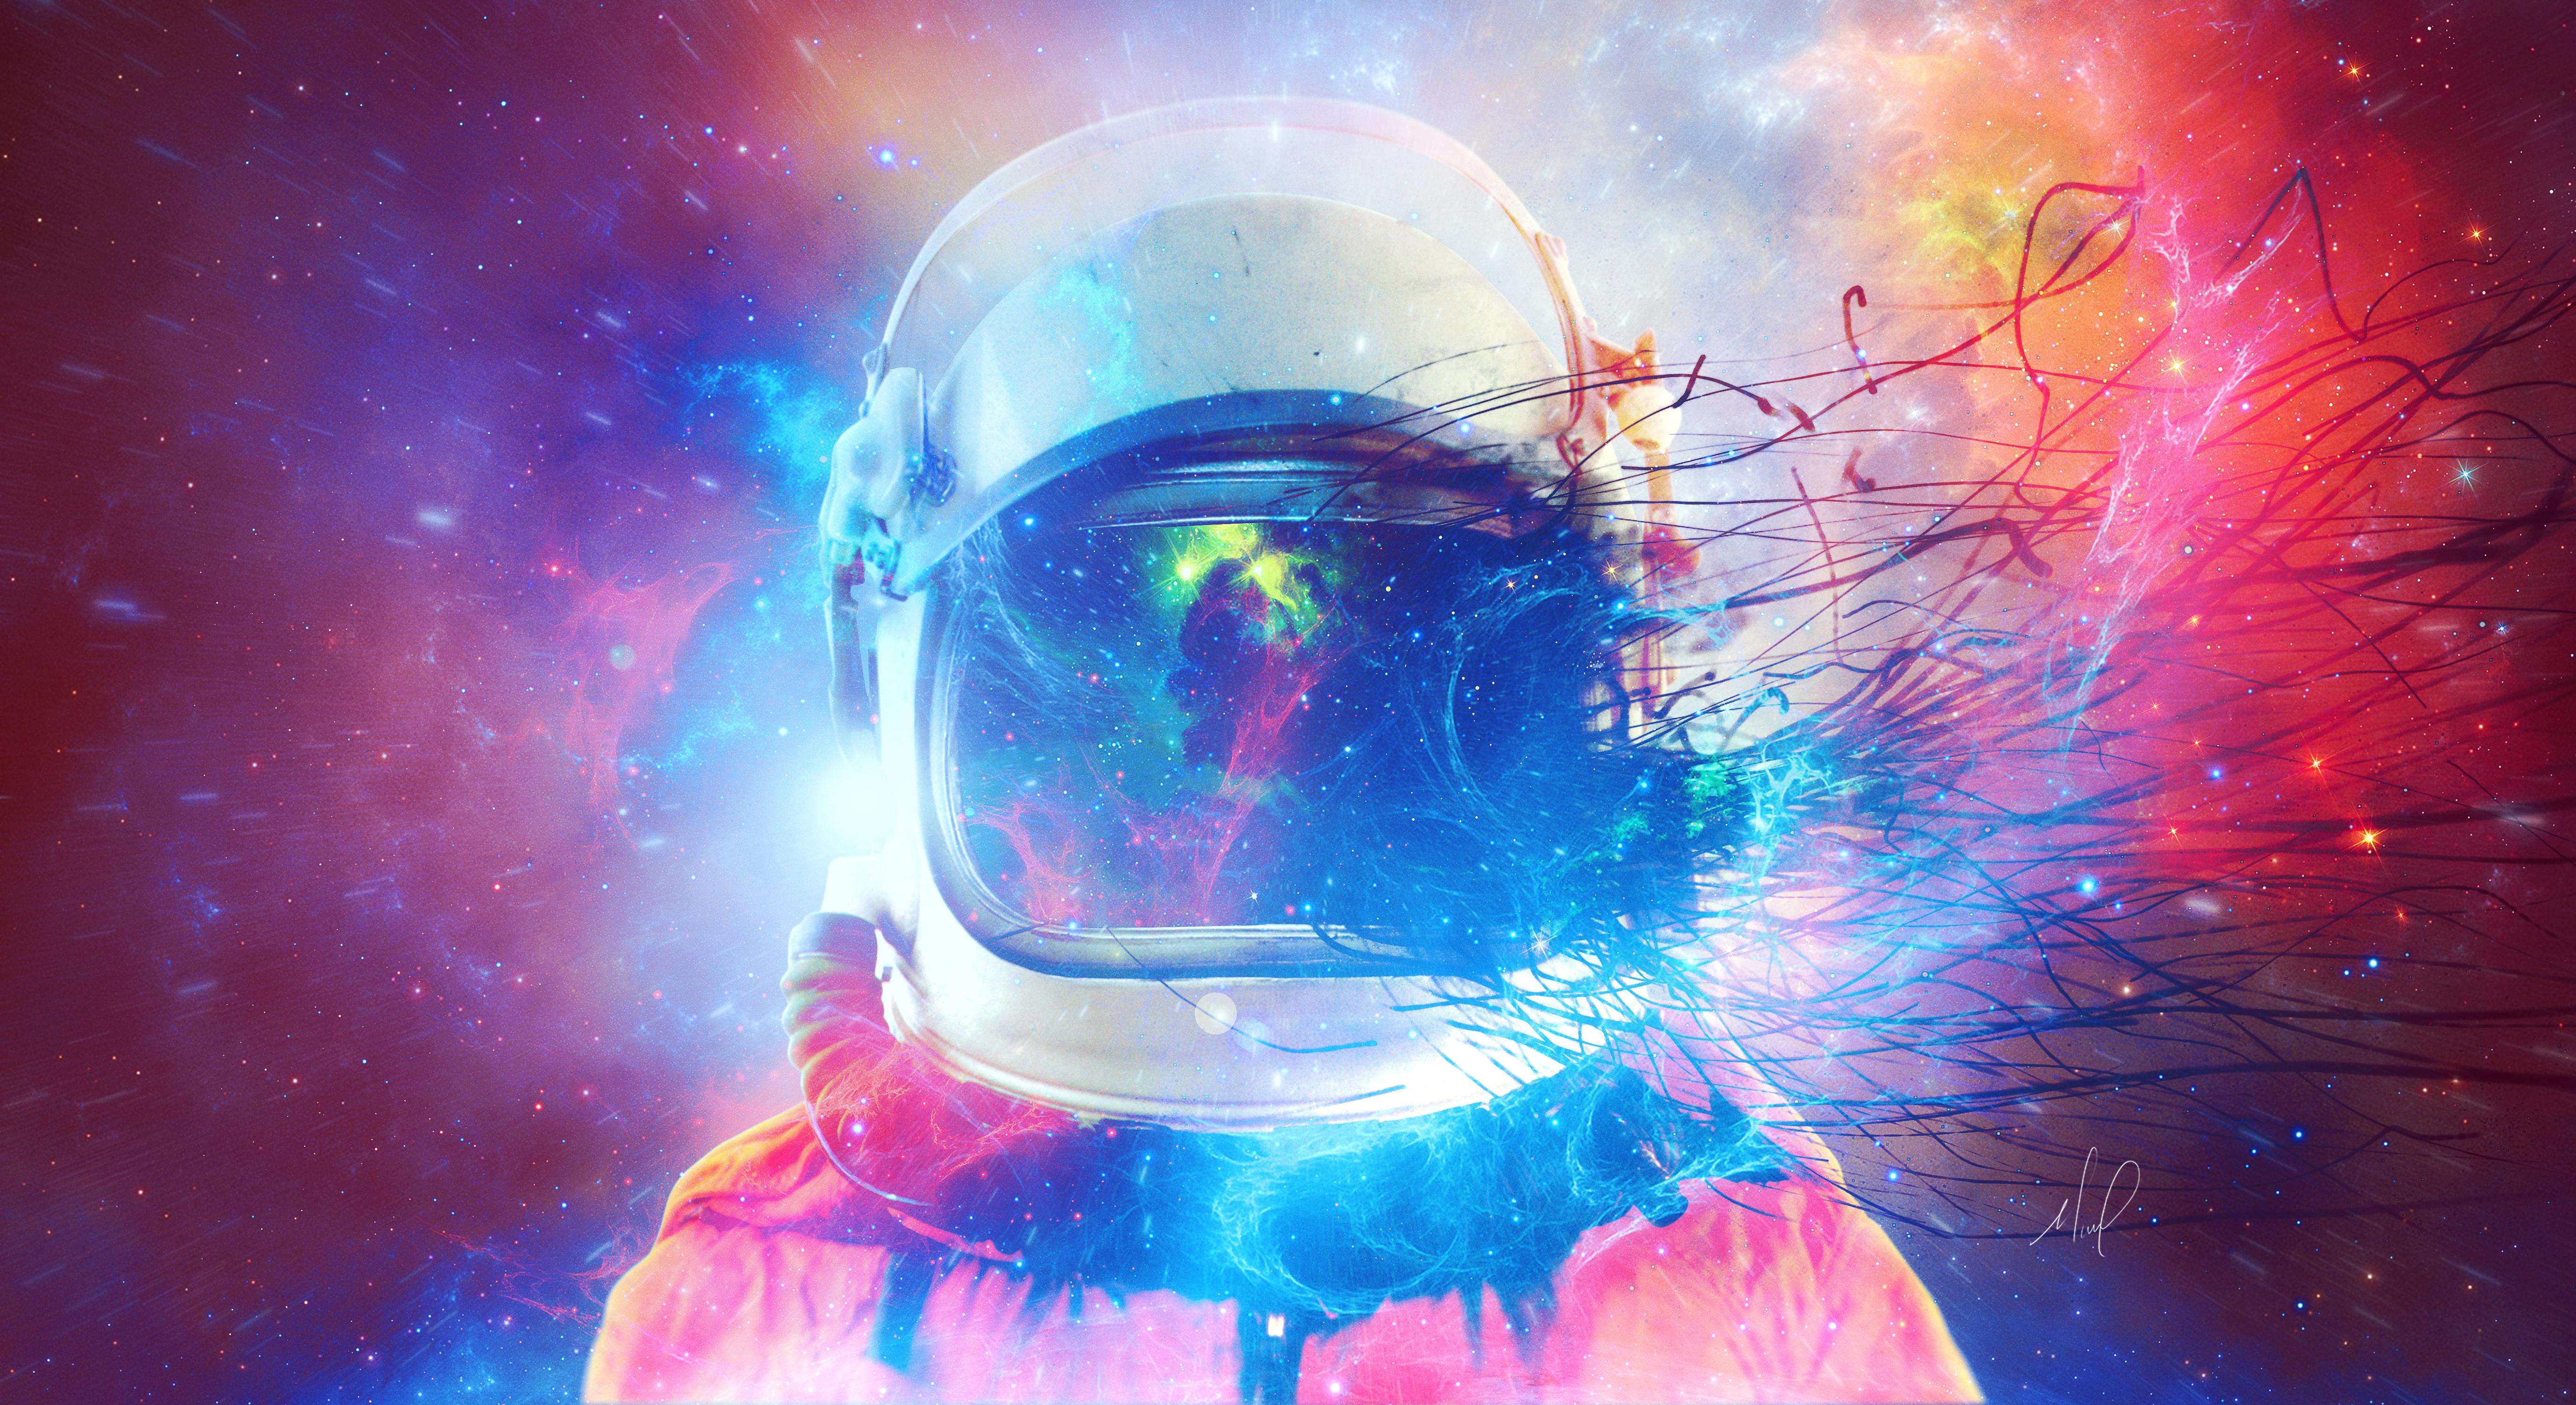 astronaut 4K wallpapers for your desktop or mobile screen free and easy